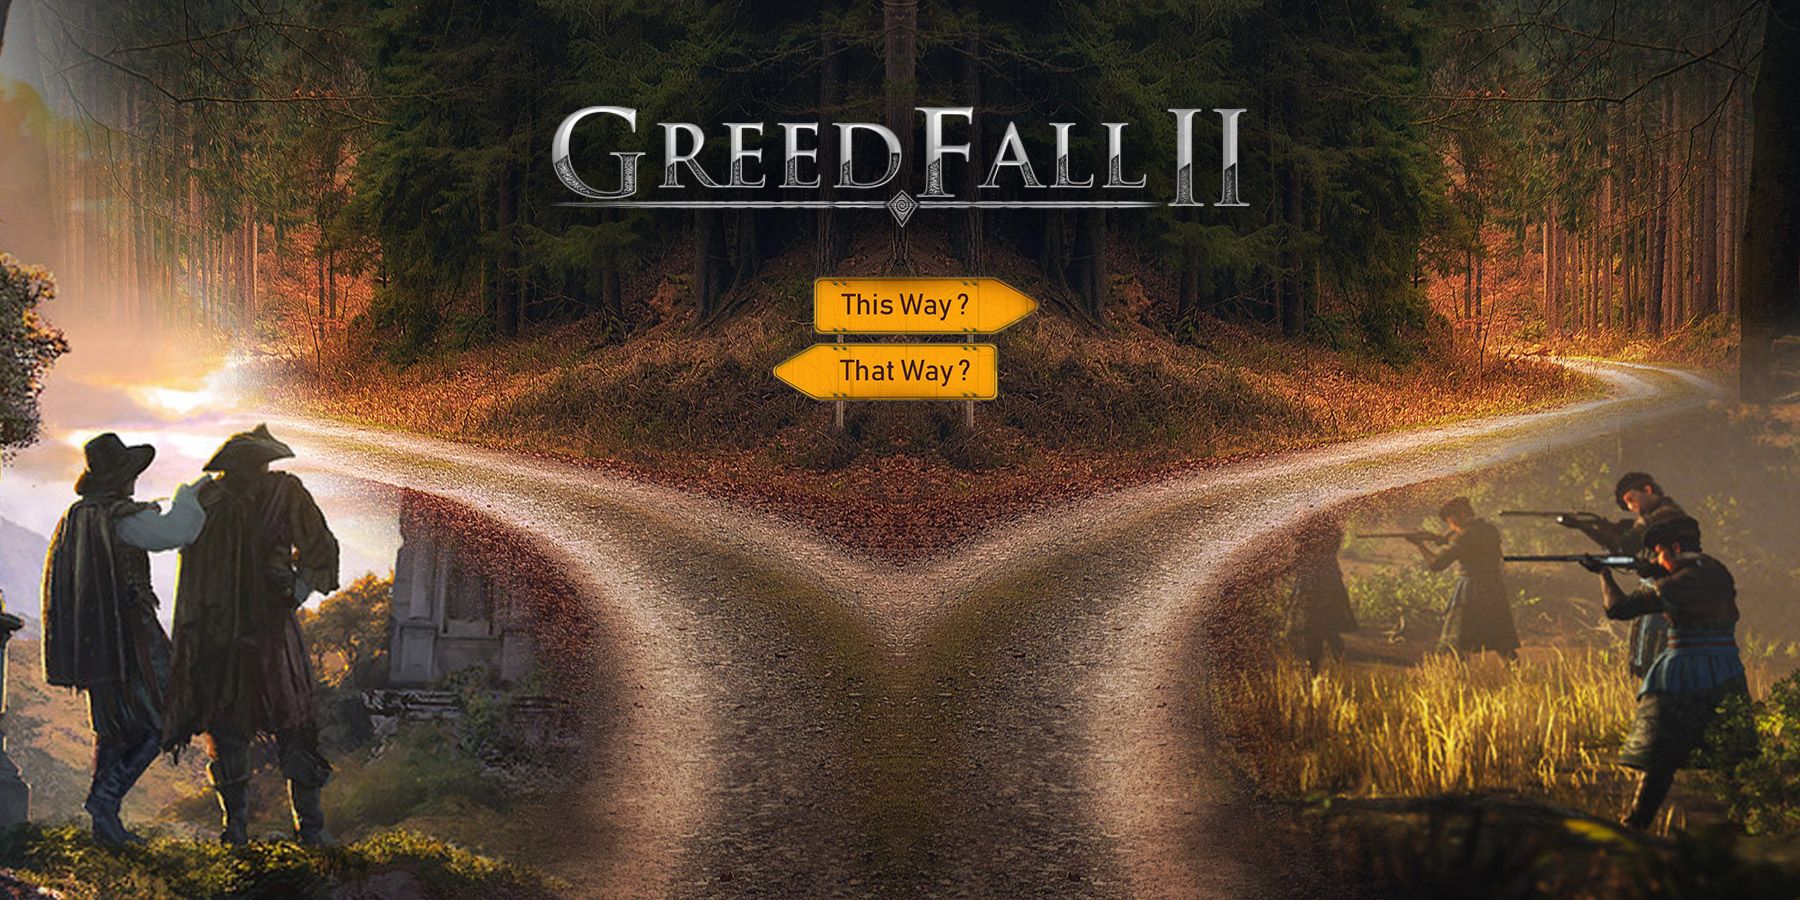 amazon, choices will be the bread and butter of greedfall 2